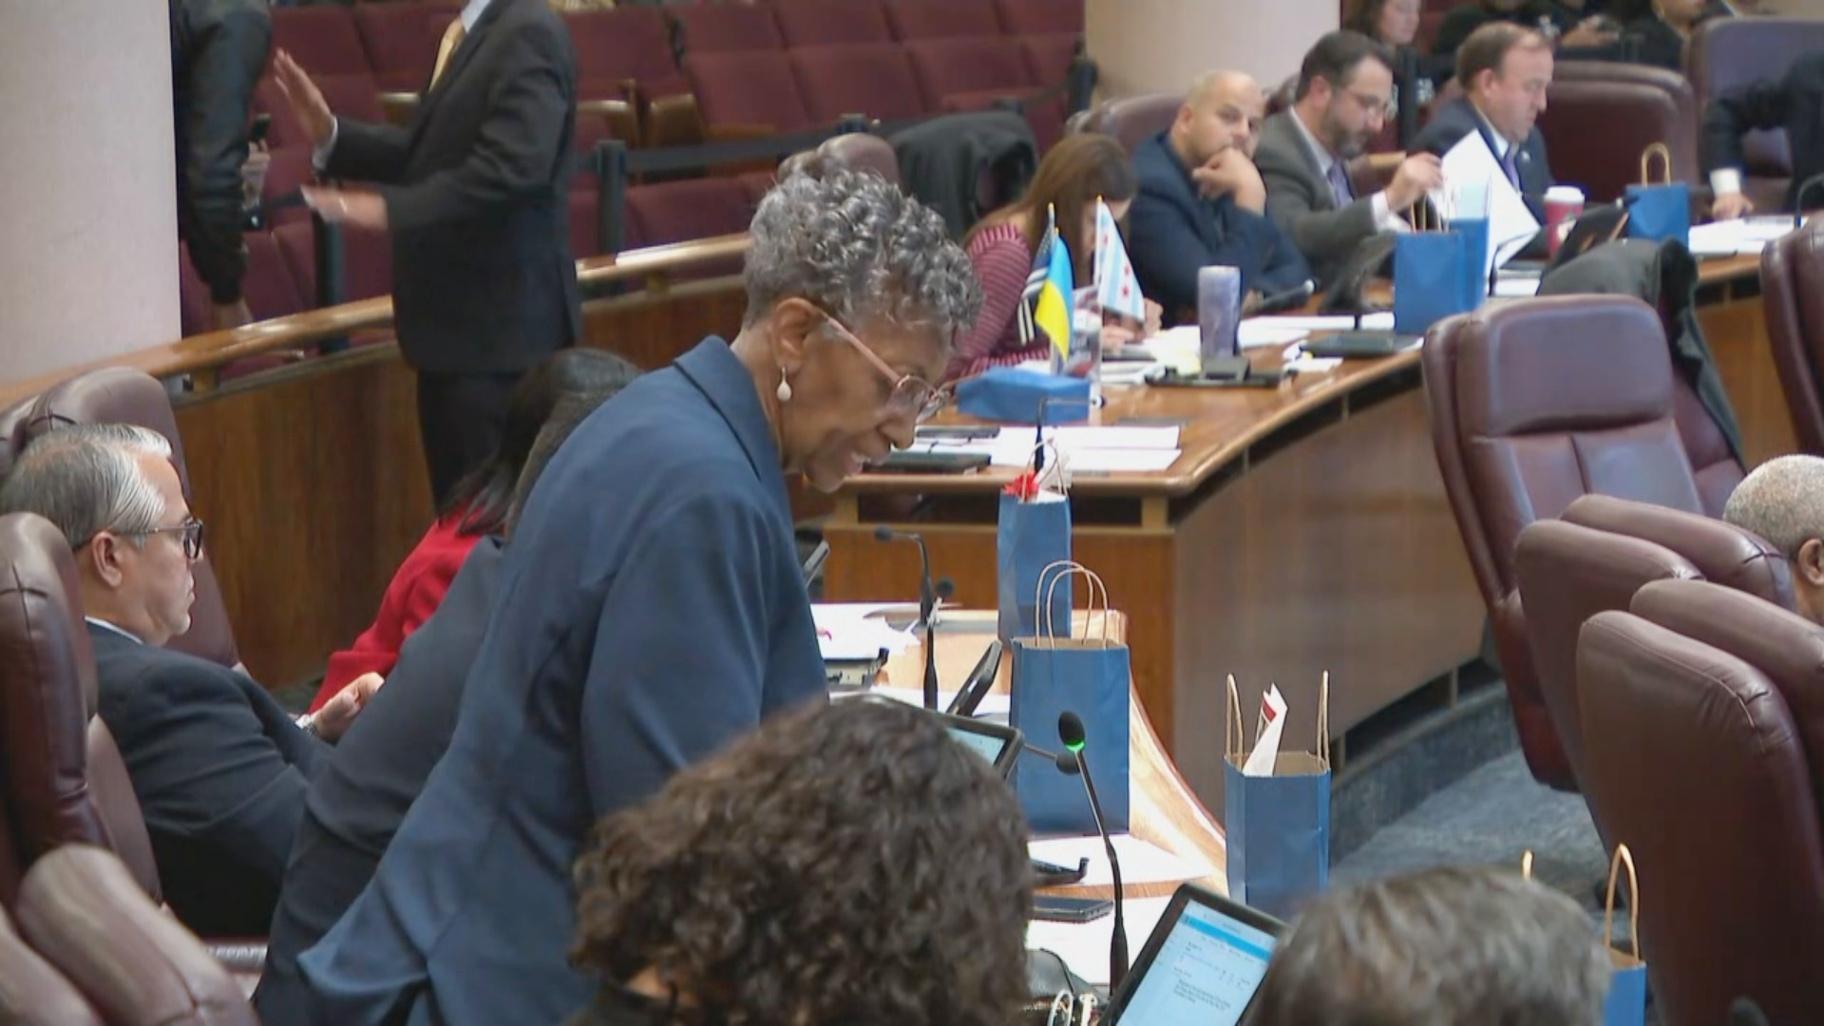 Ald. Carrie Austin (34th Ward) stands to speak at the Dec. 14, 2022, Chicago City Council meeting. (WTTW News)